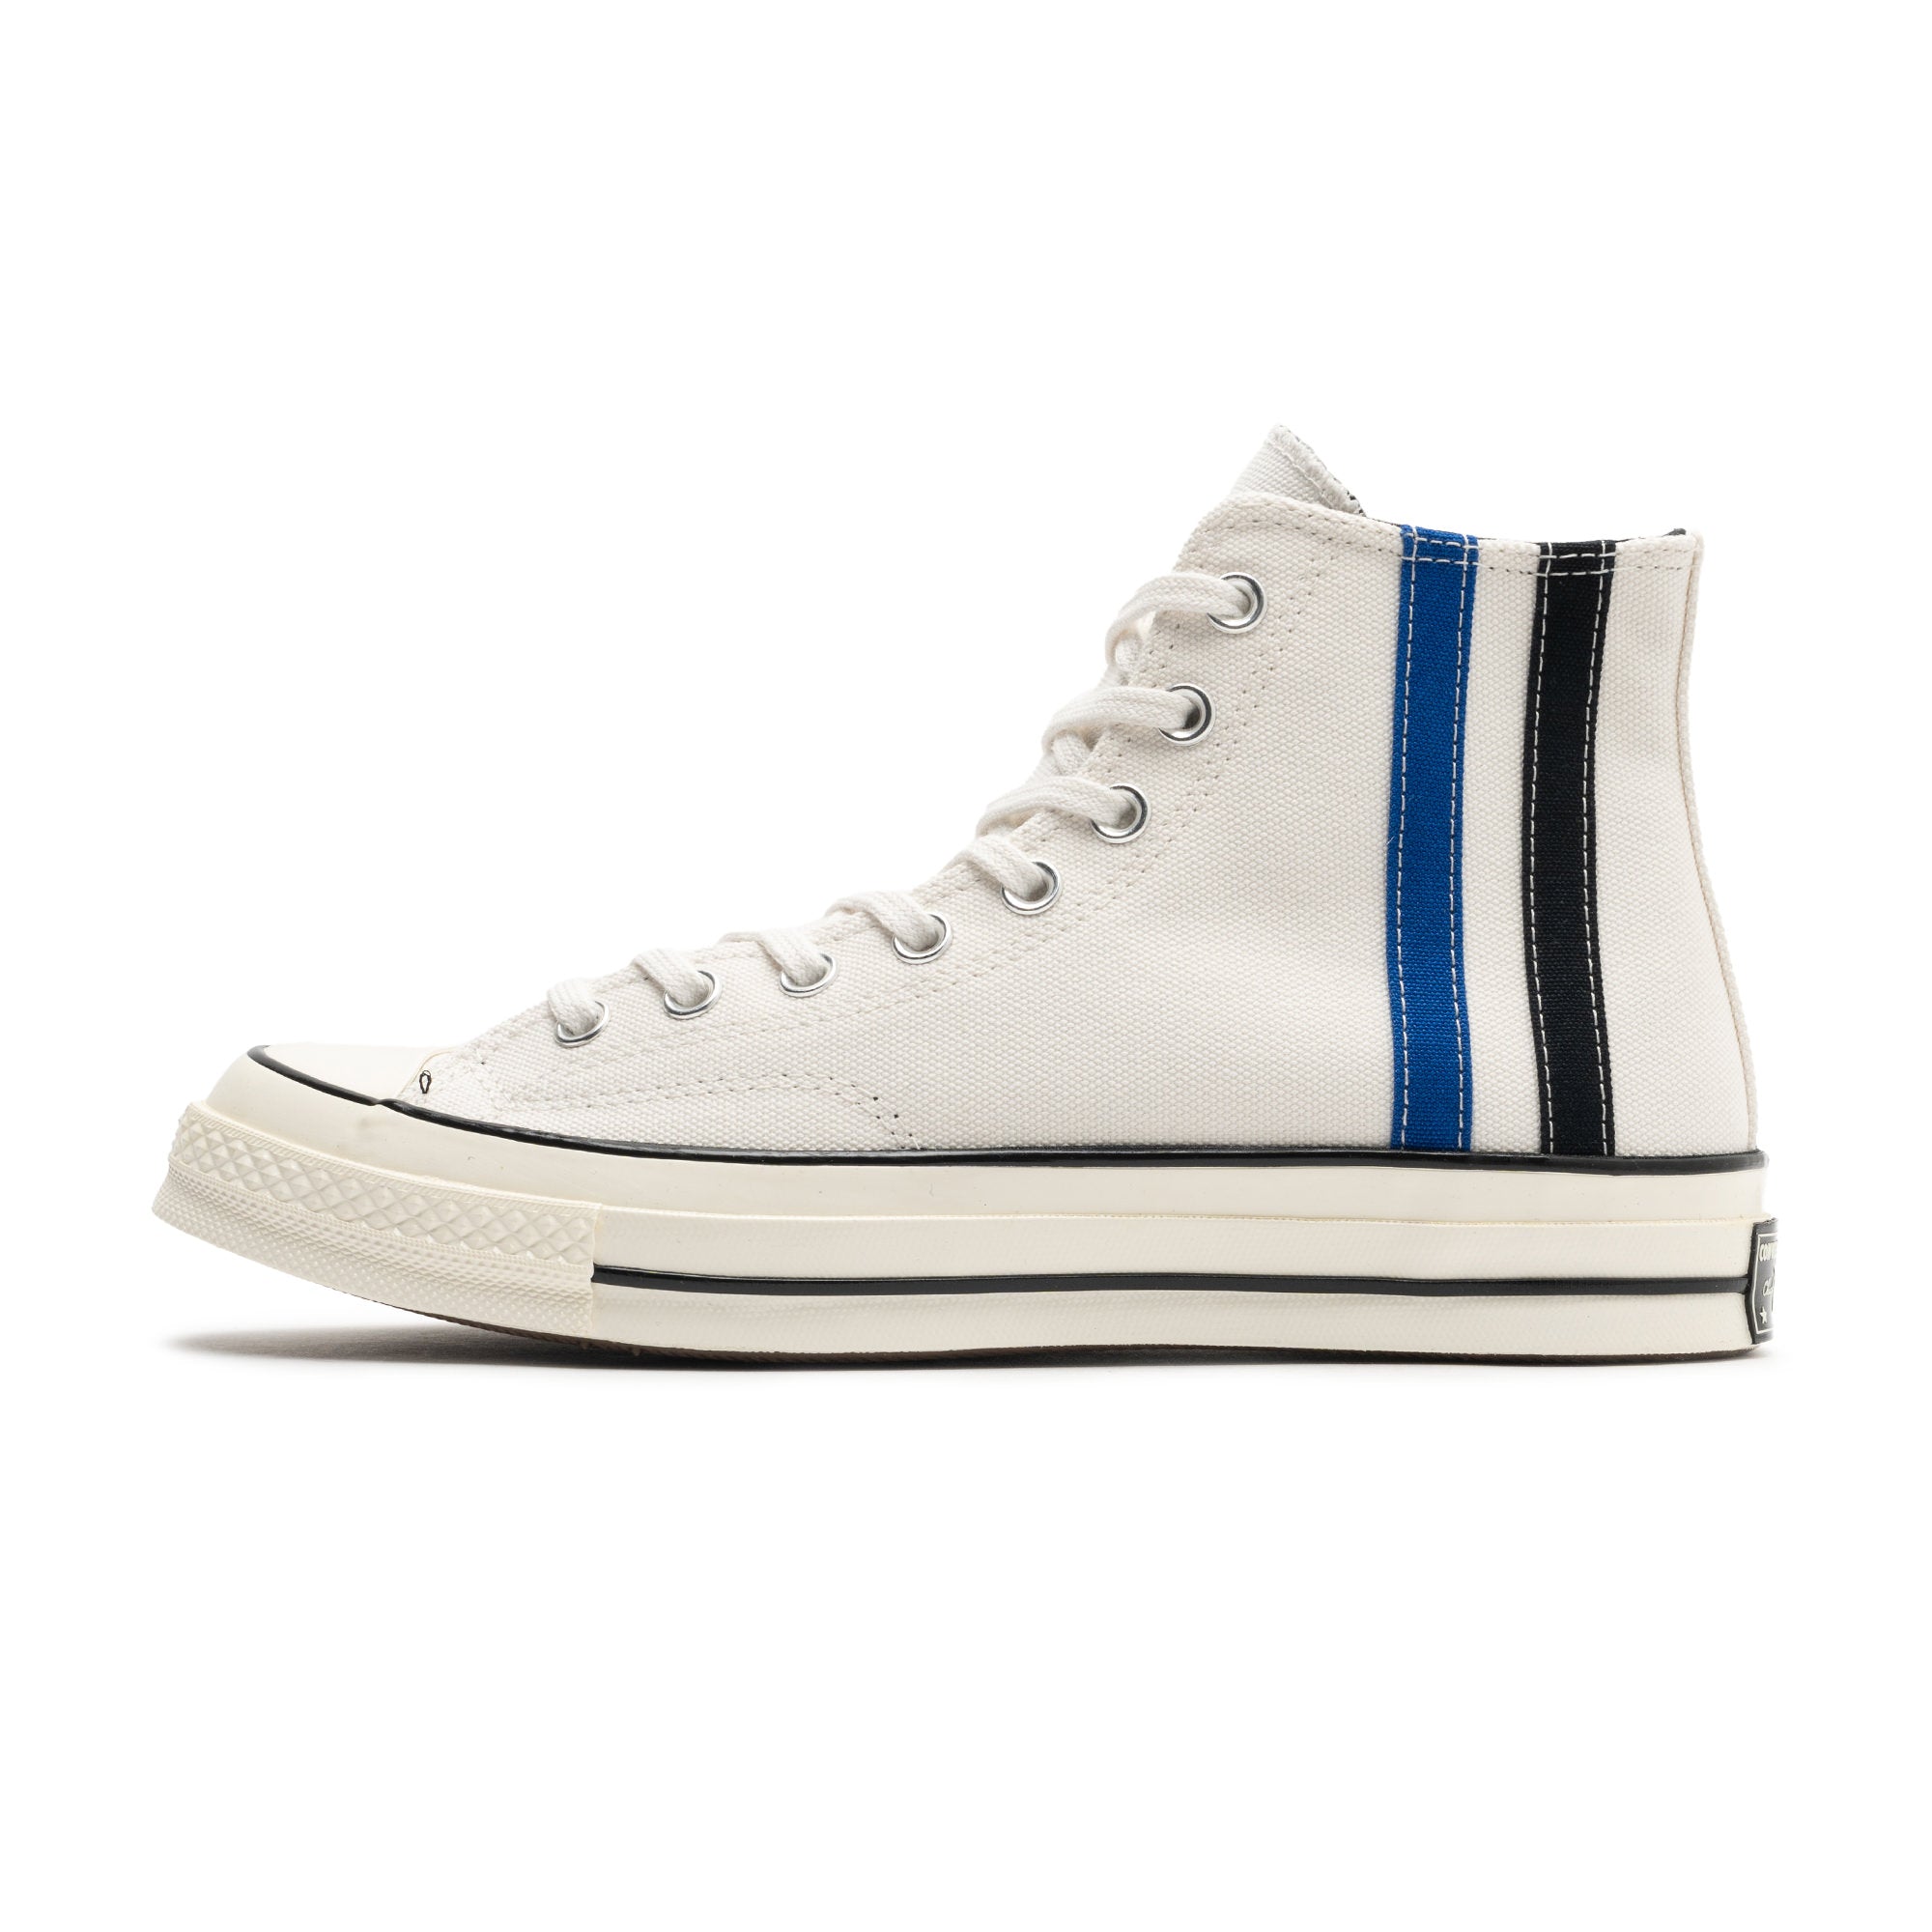 Sneakers CONVERSE Chuck 70 Ox 167673C White Egret Shimmer